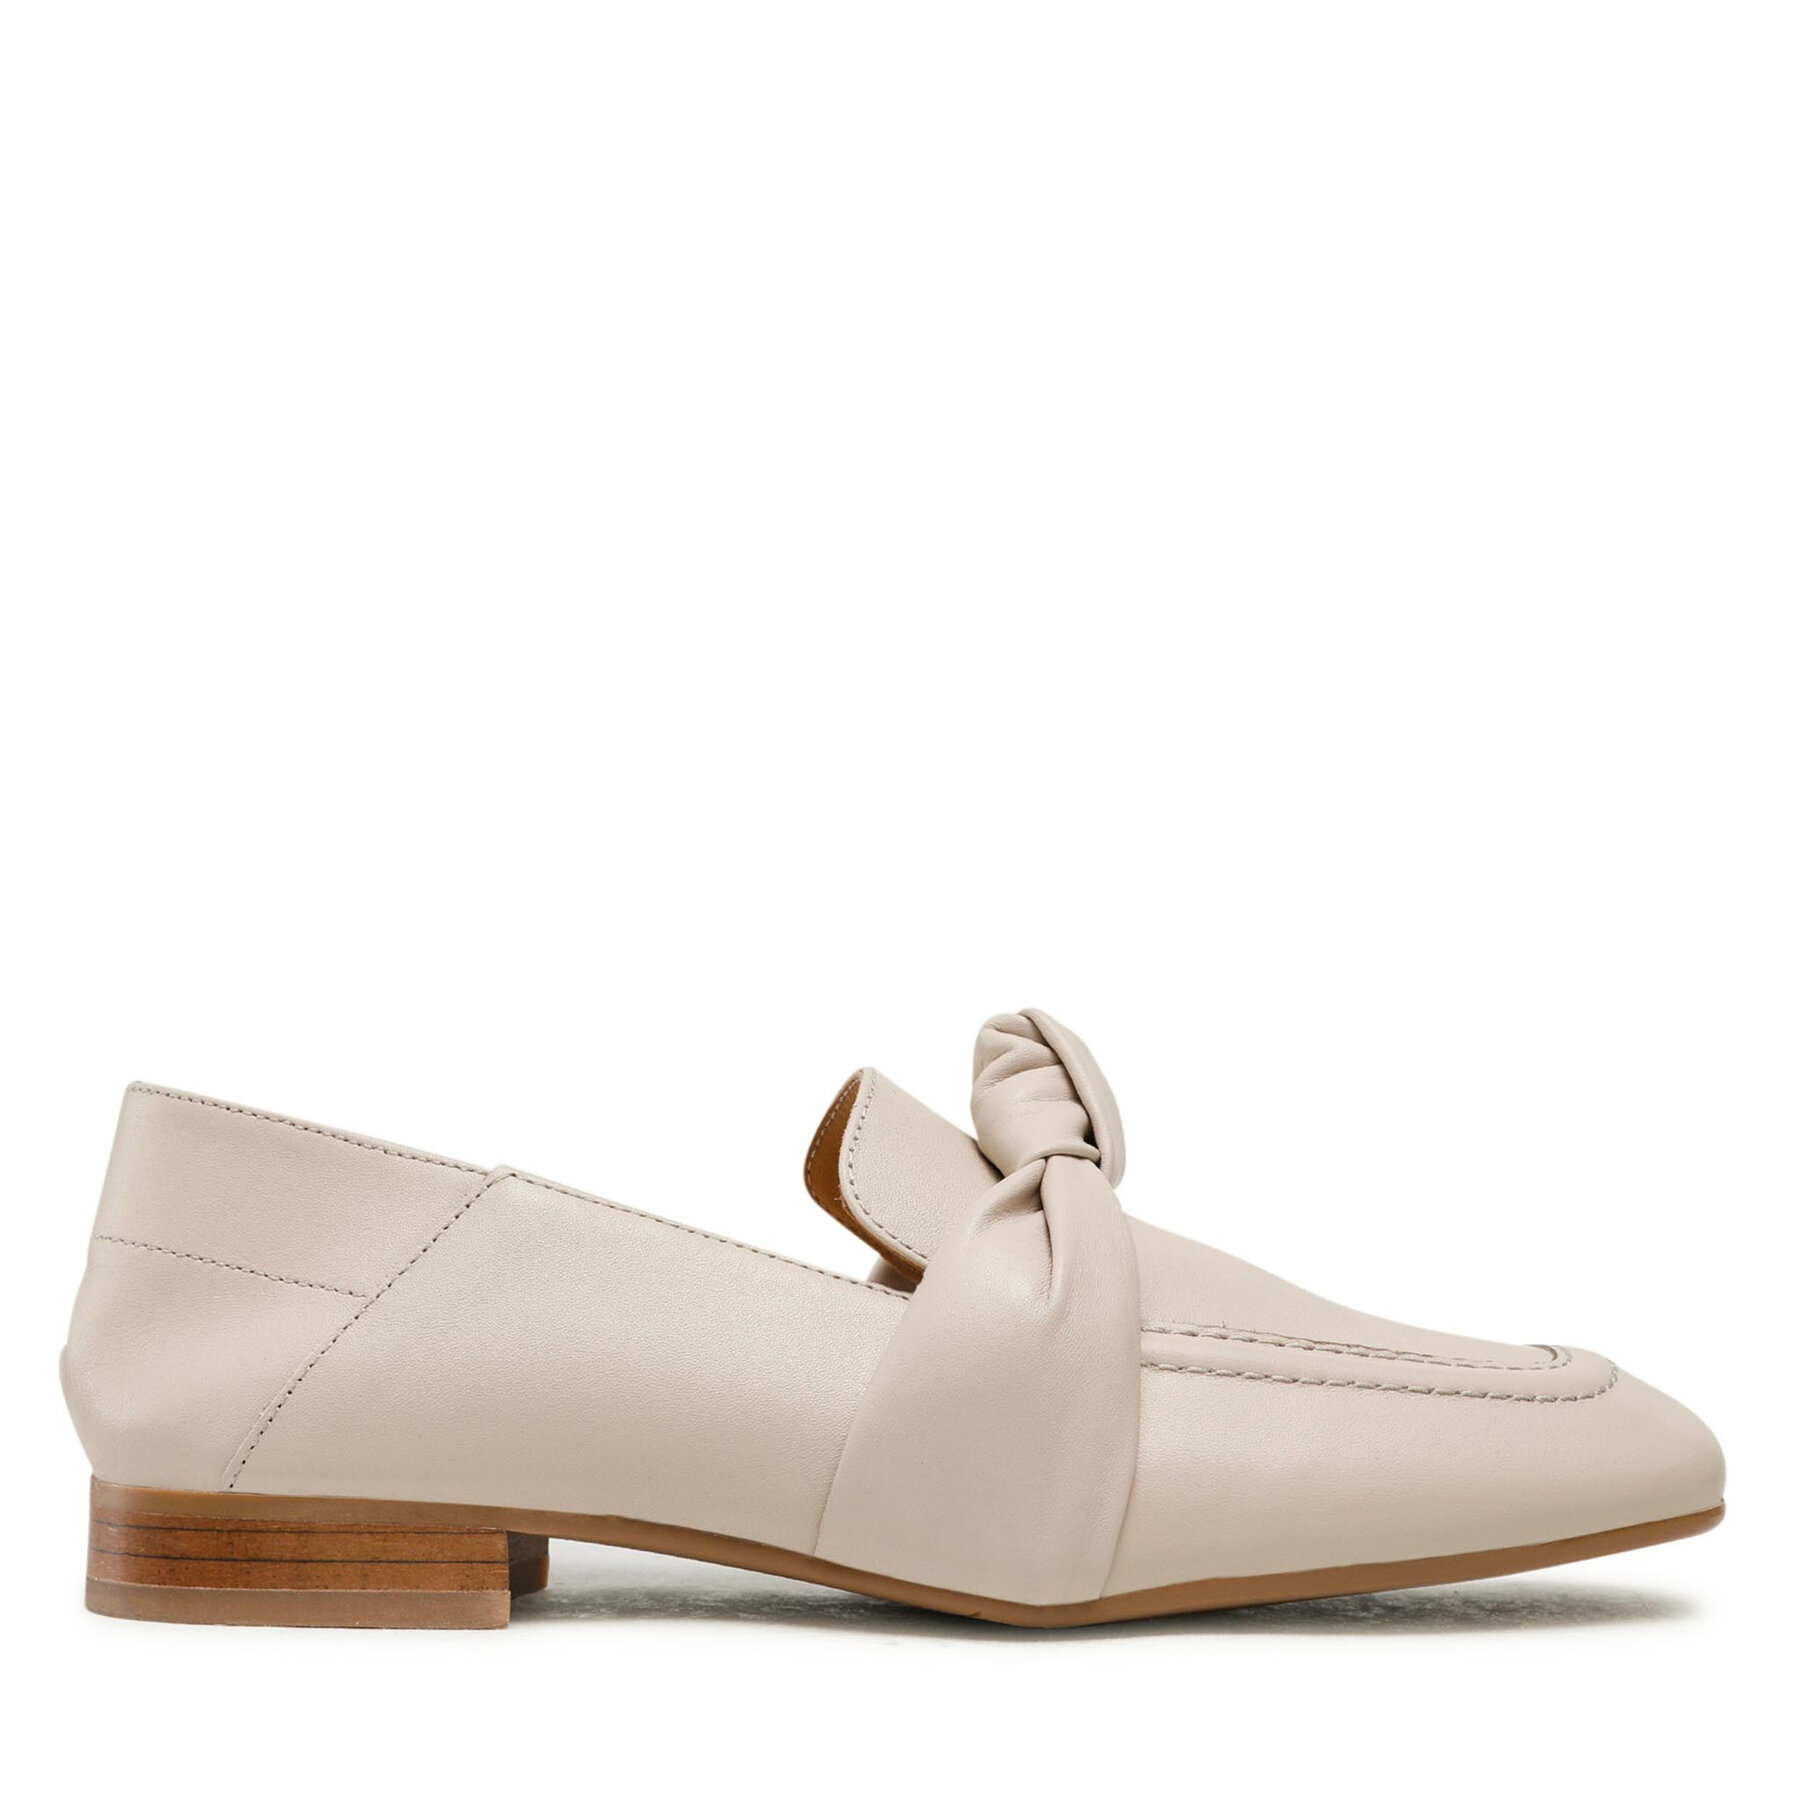 Loaferice Gino Rossi 7311 Beige